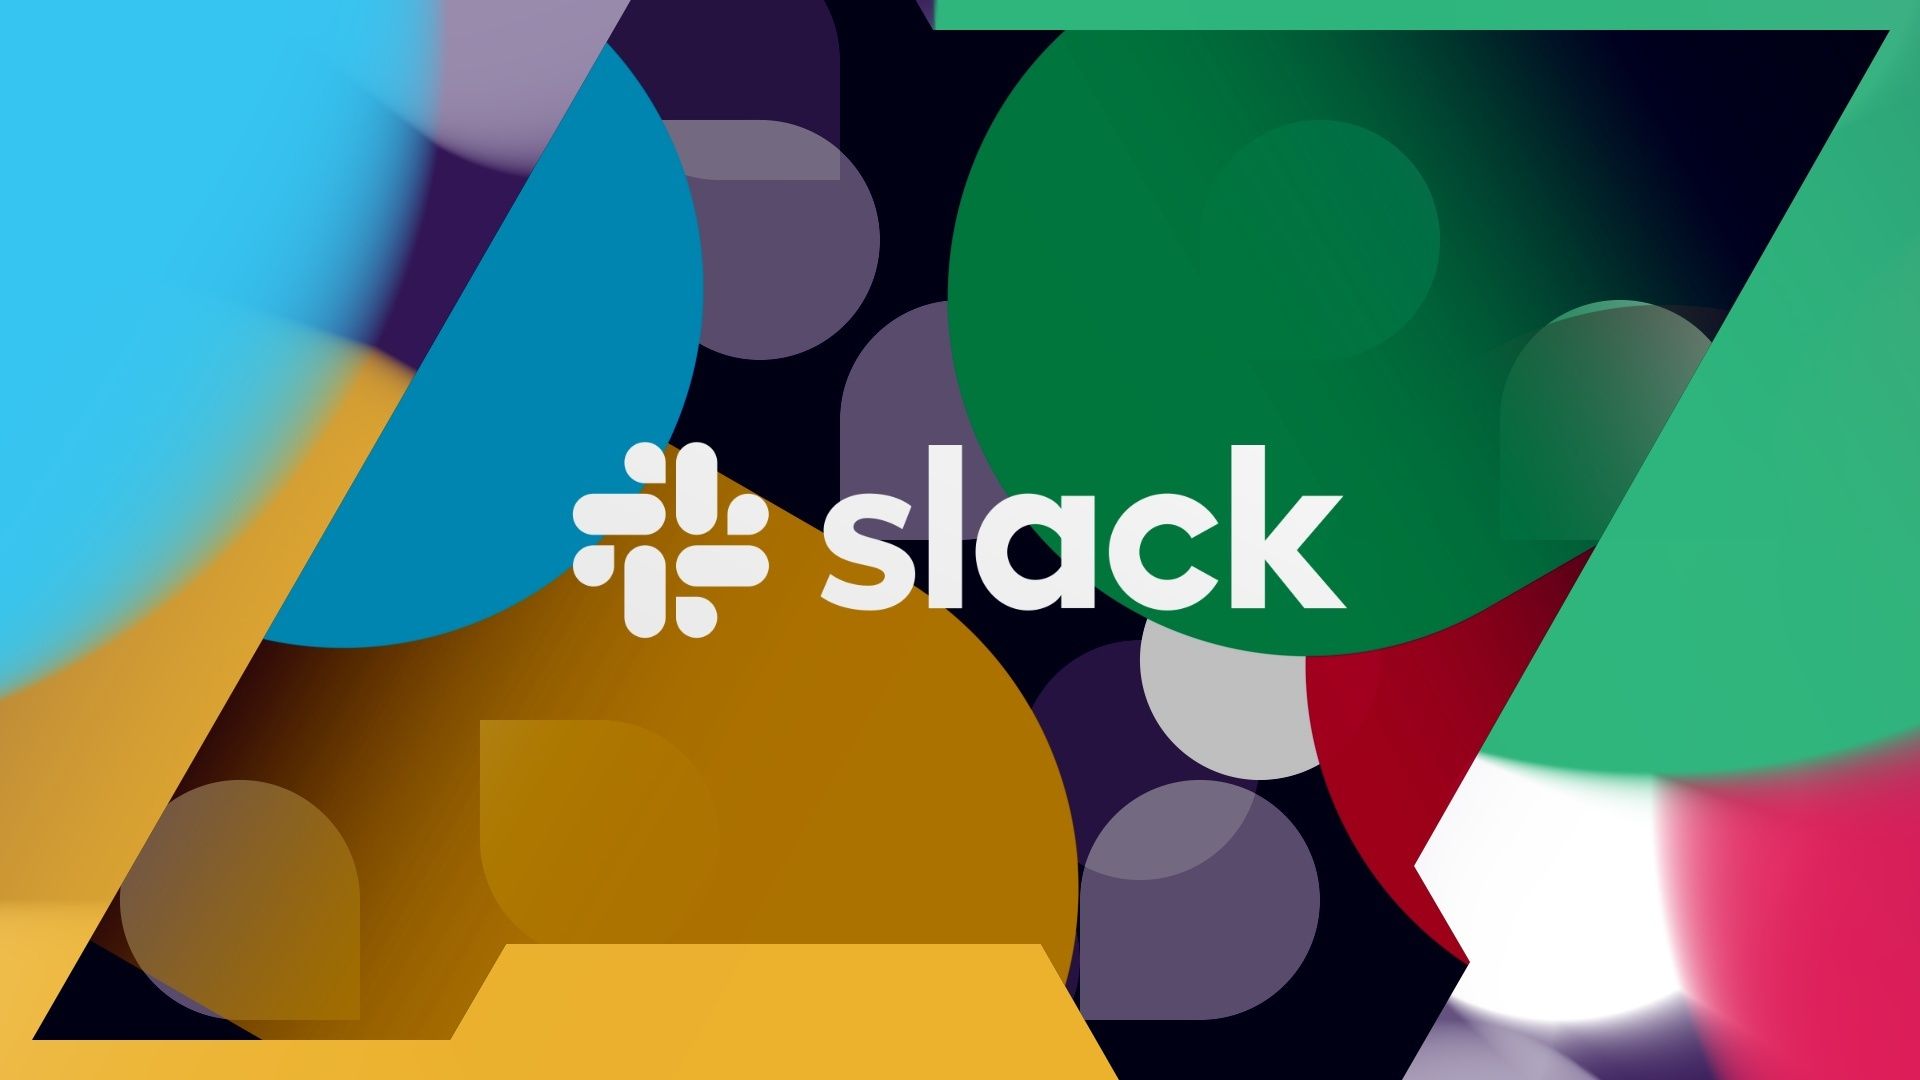 The Slack logo against a multi-color background and the Android Police logo